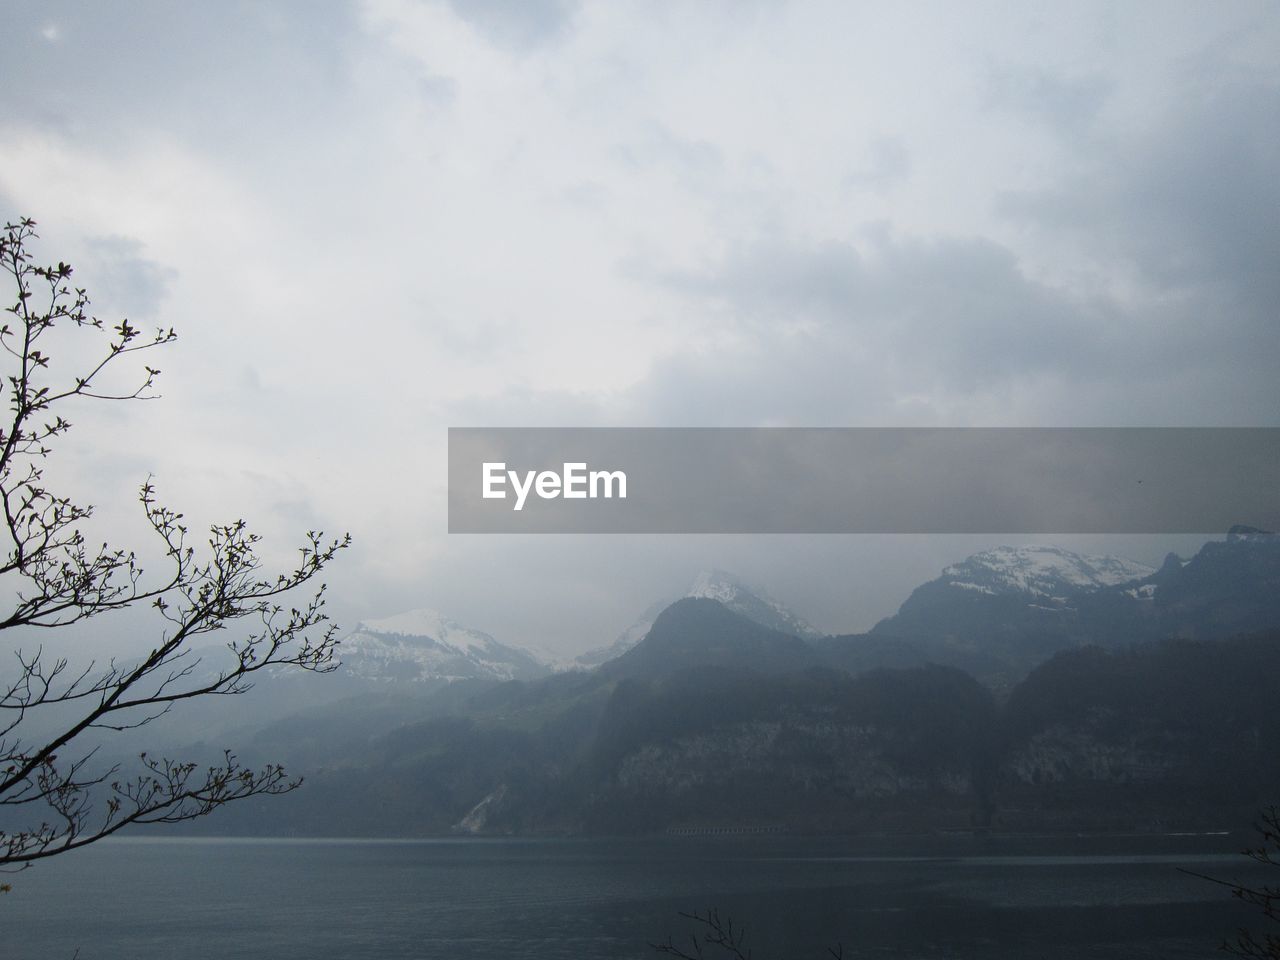 SCENIC VIEW OF MOUNTAINS AGAINST CLOUDY SKY